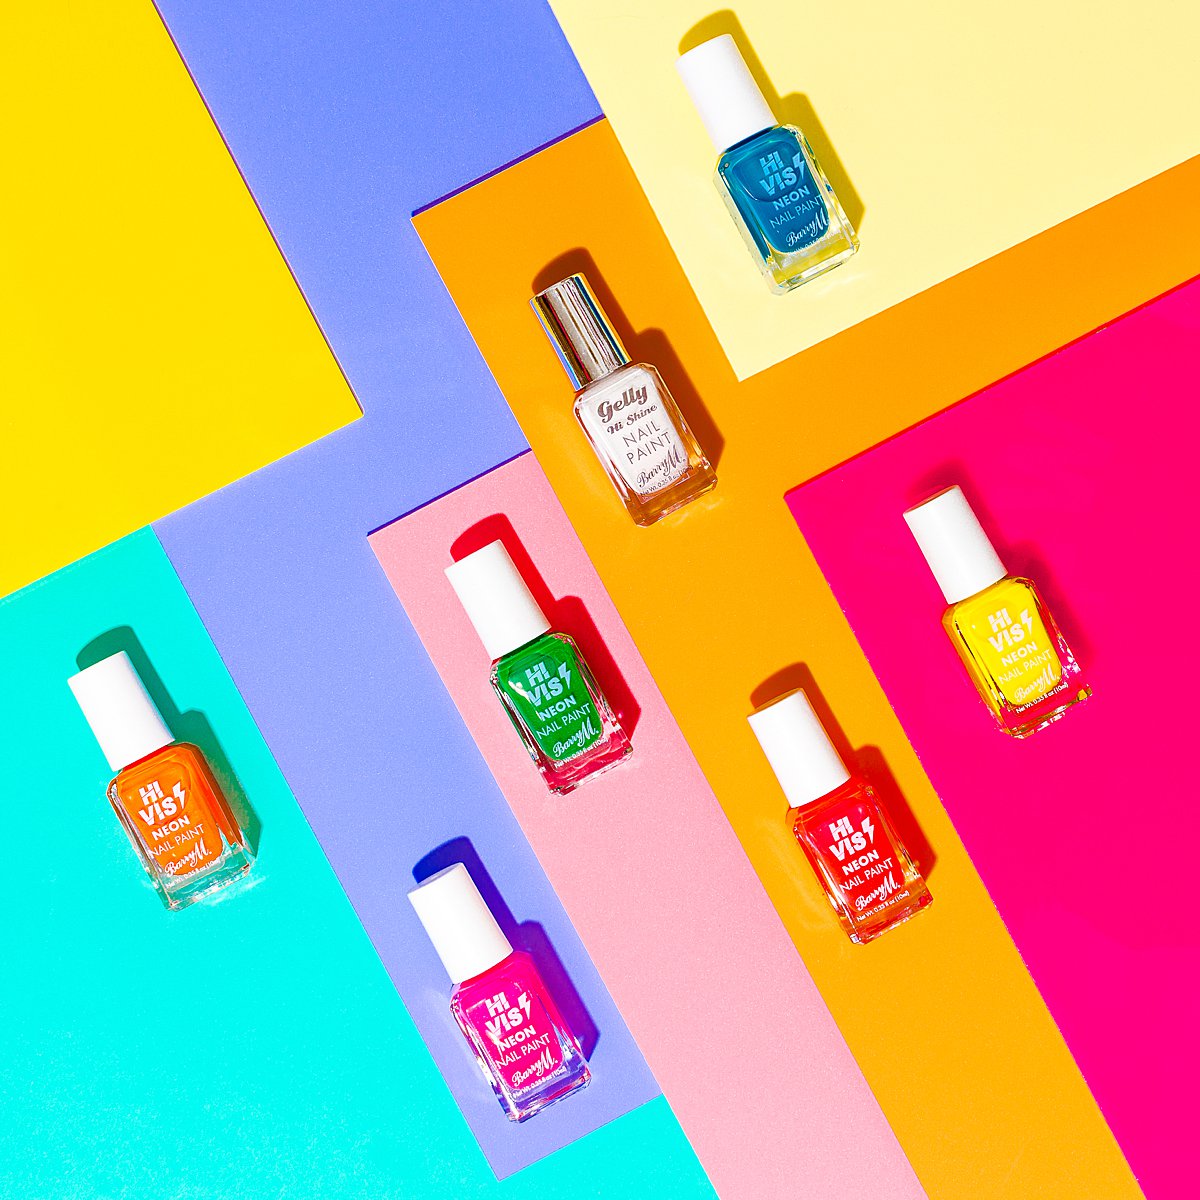 Fun colourful beauty product content creation for Barry M cosmetics. Styled makeup product stills photography by Marianne Taylor.